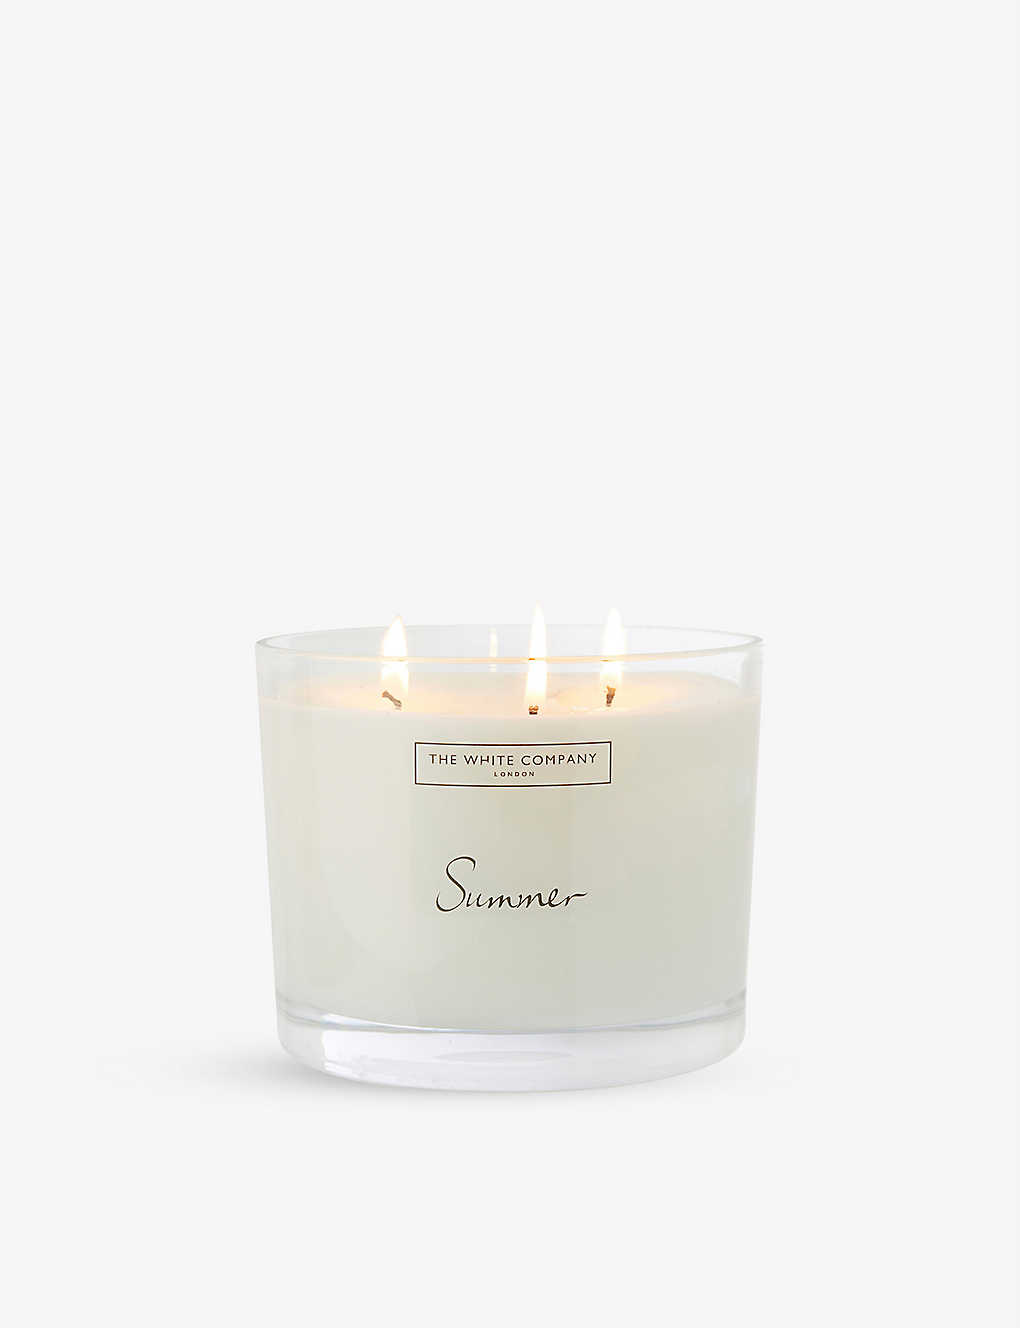 The White Company Summer Scented Candle 770g